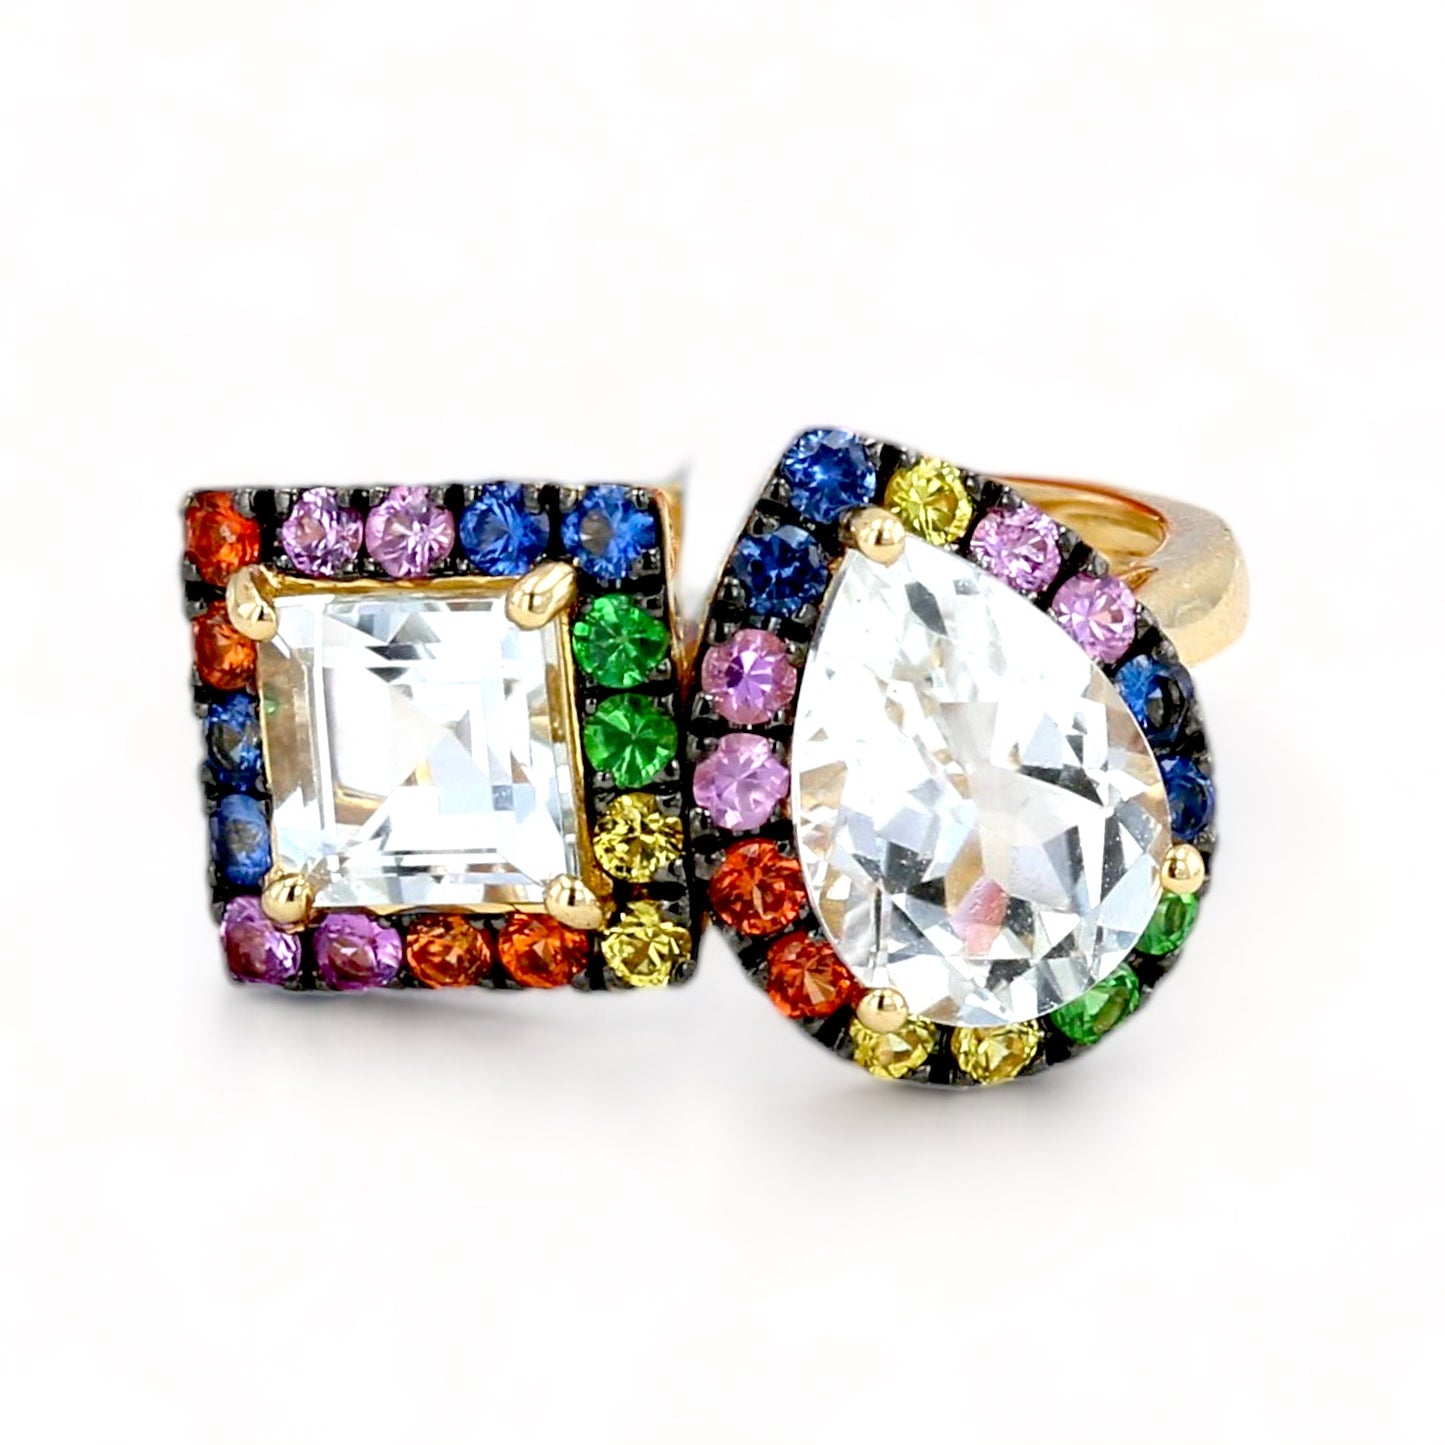 14K Yellow gold bypass EFFY rainbow multi color sapphire ring-31871